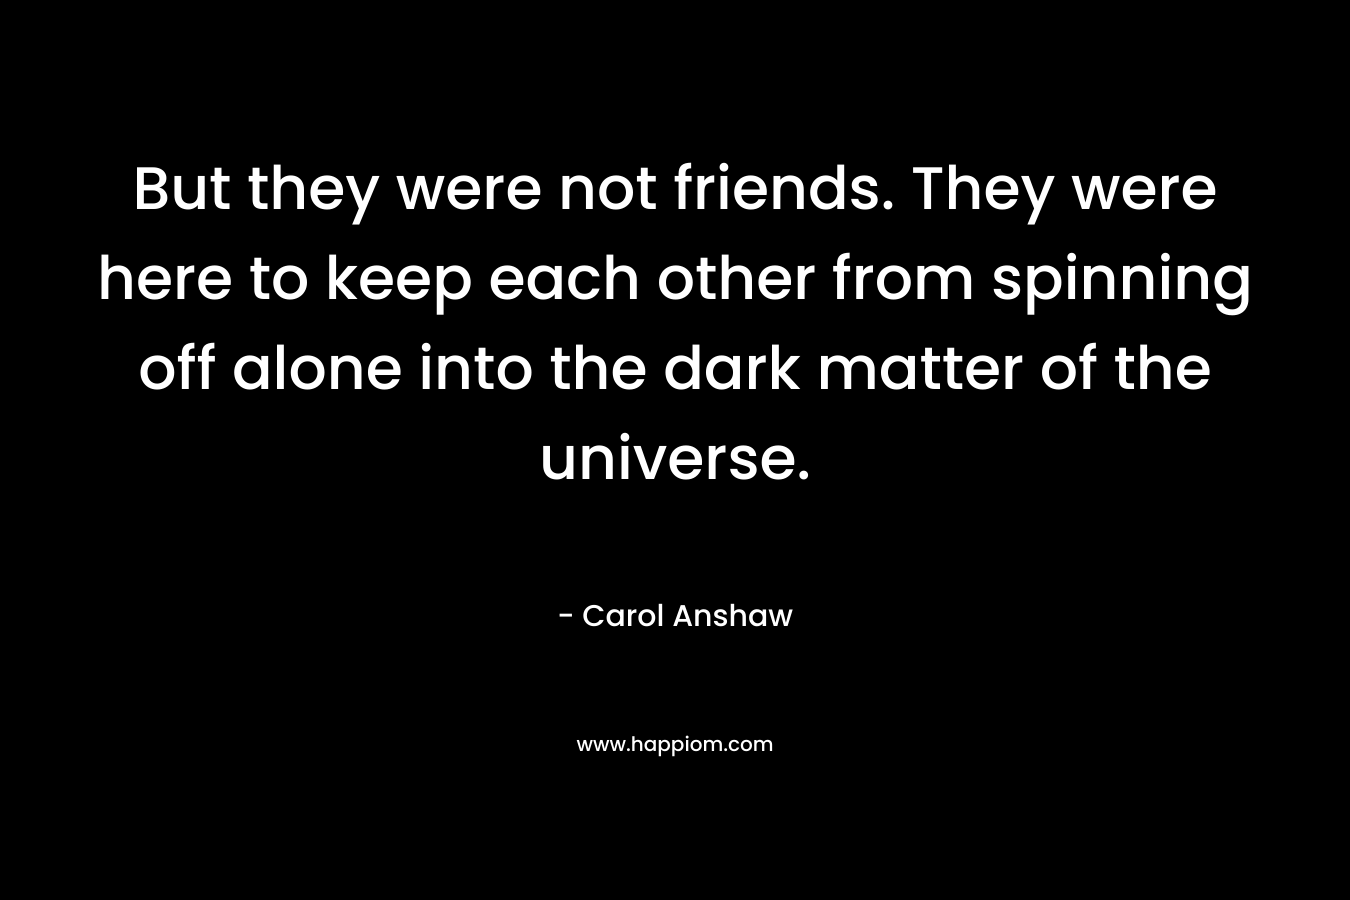 But they were not friends. They were here to keep each other from spinning off alone into the dark matter of the universe. – Carol Anshaw